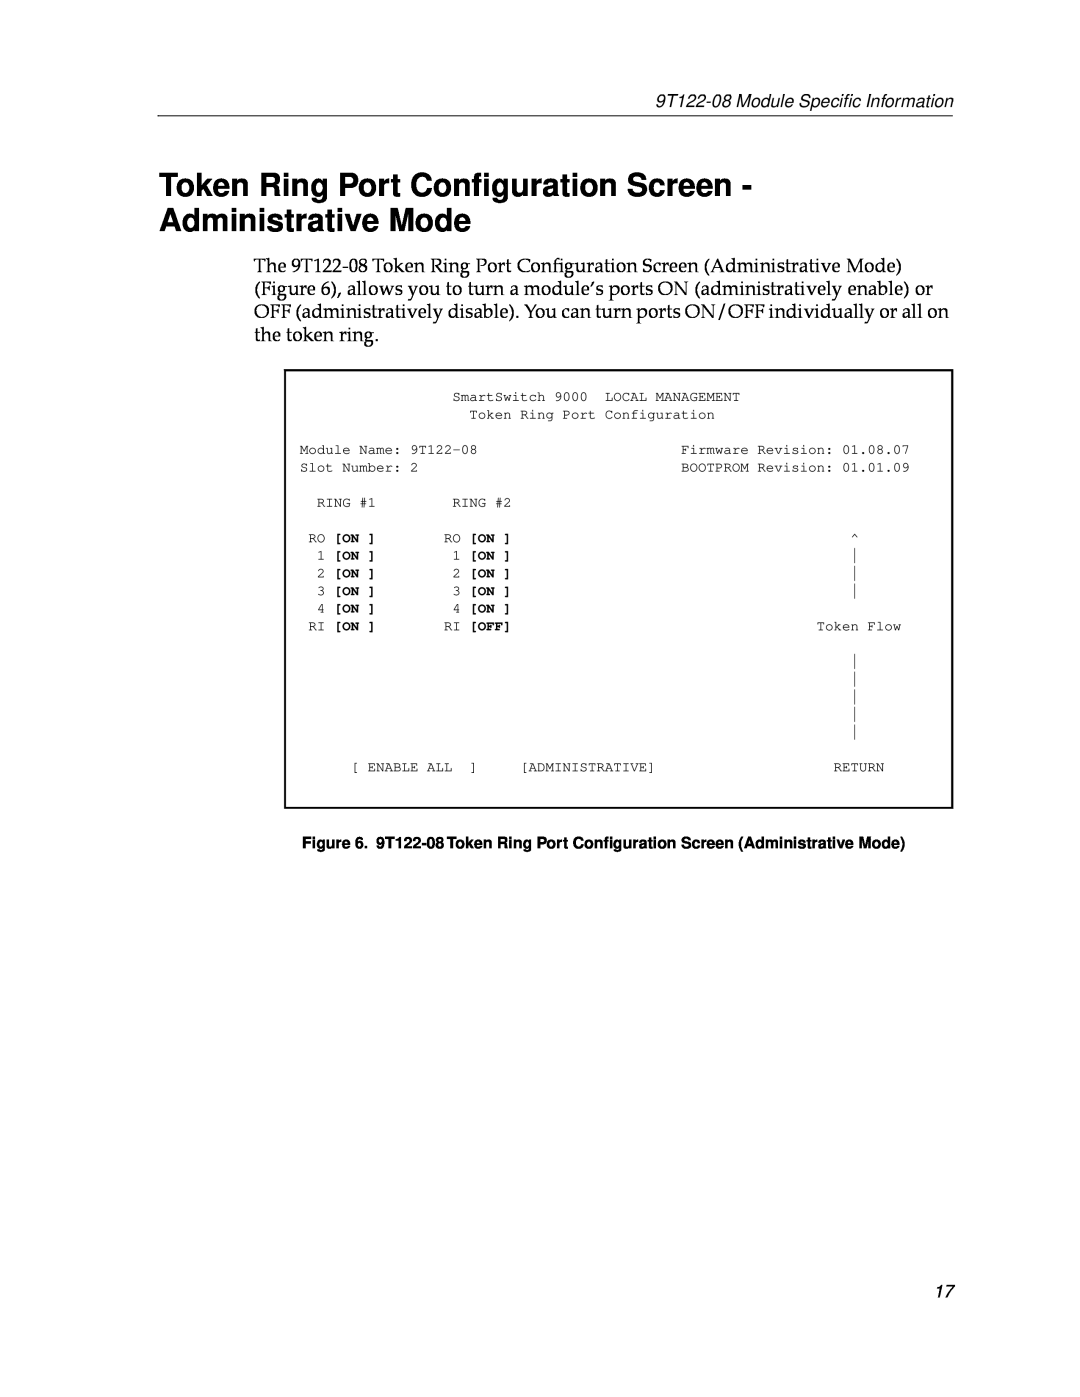 Cabletron Systems 9T122-08 appendix Token Ring Port Conﬁguration Screen Administrative Mode 